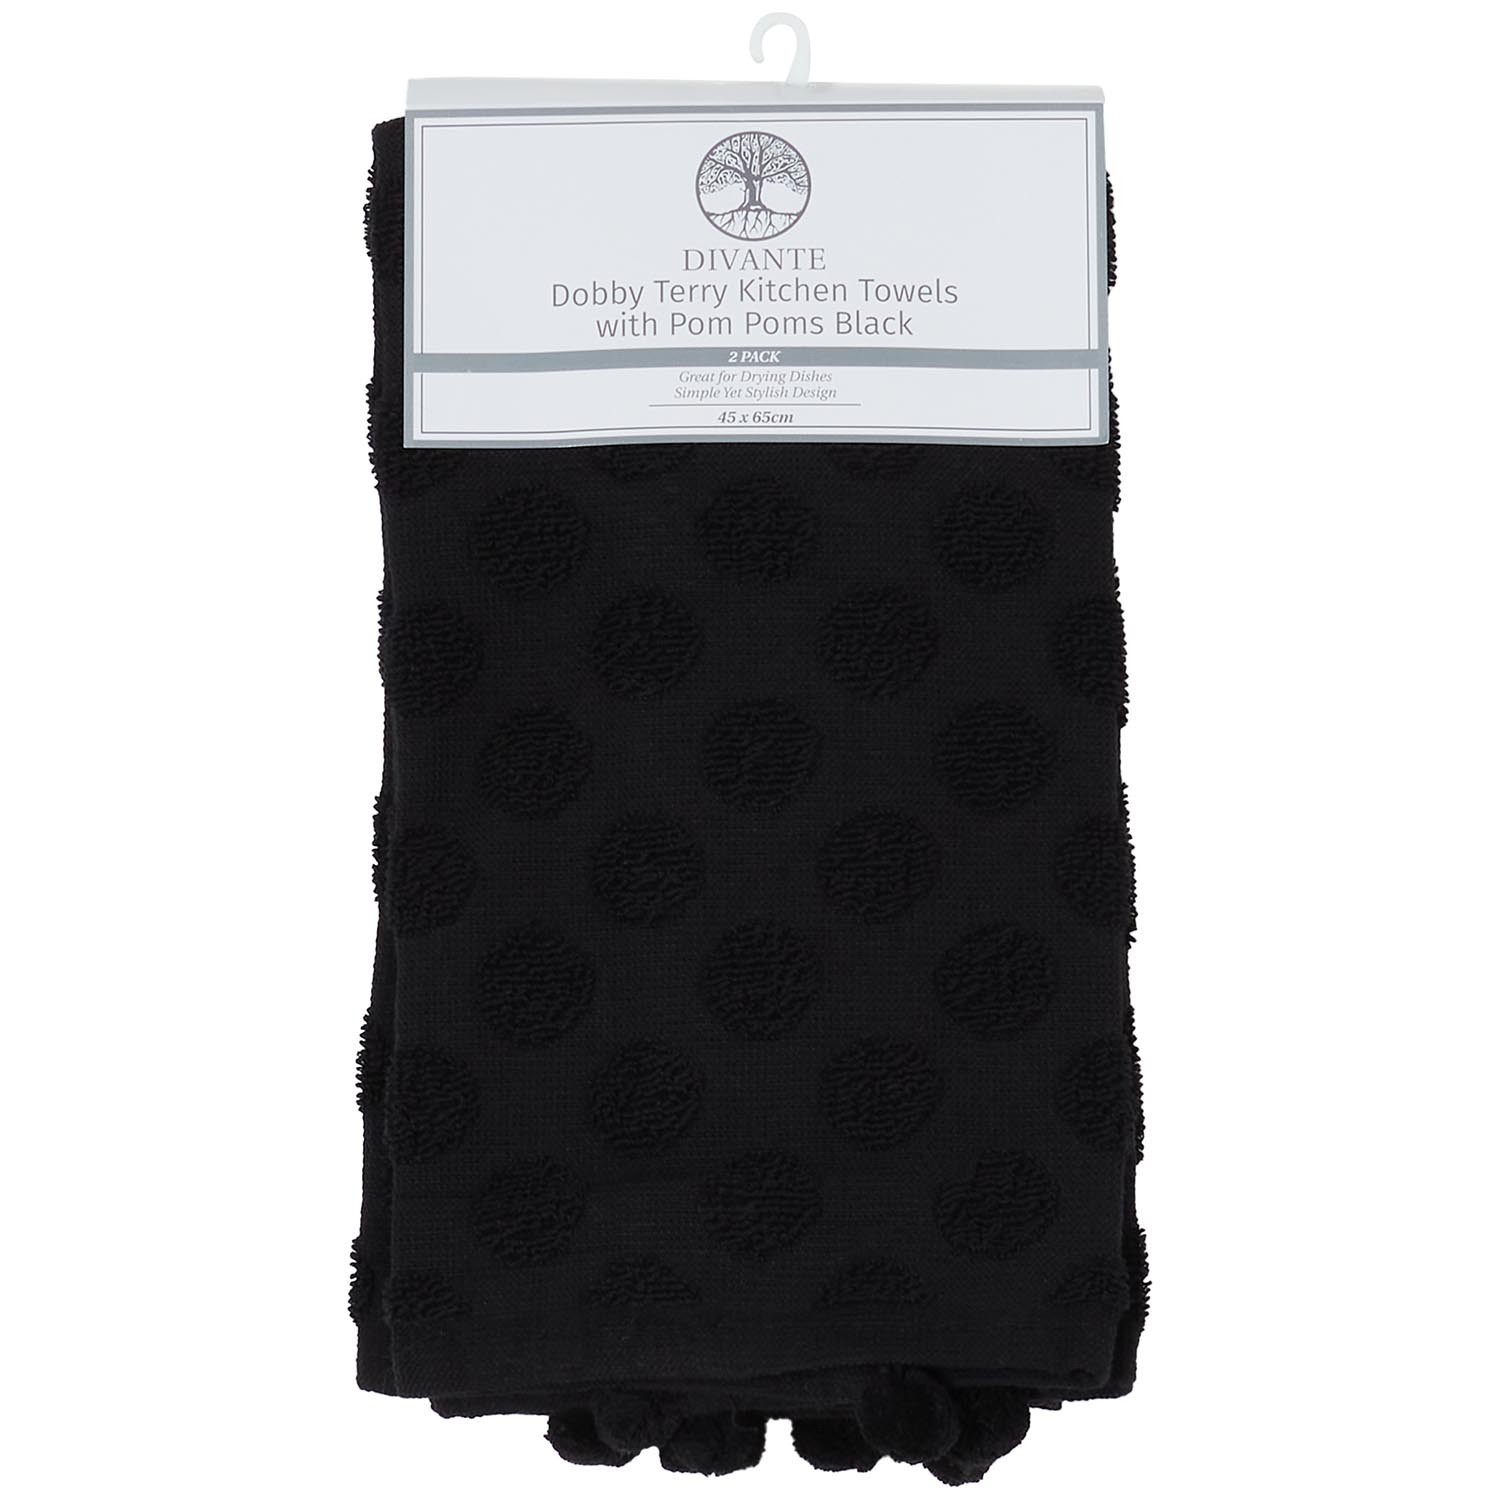 Pack of 2 Dobby Terry Kitchen Towels with Pom Poms - Black Image 3